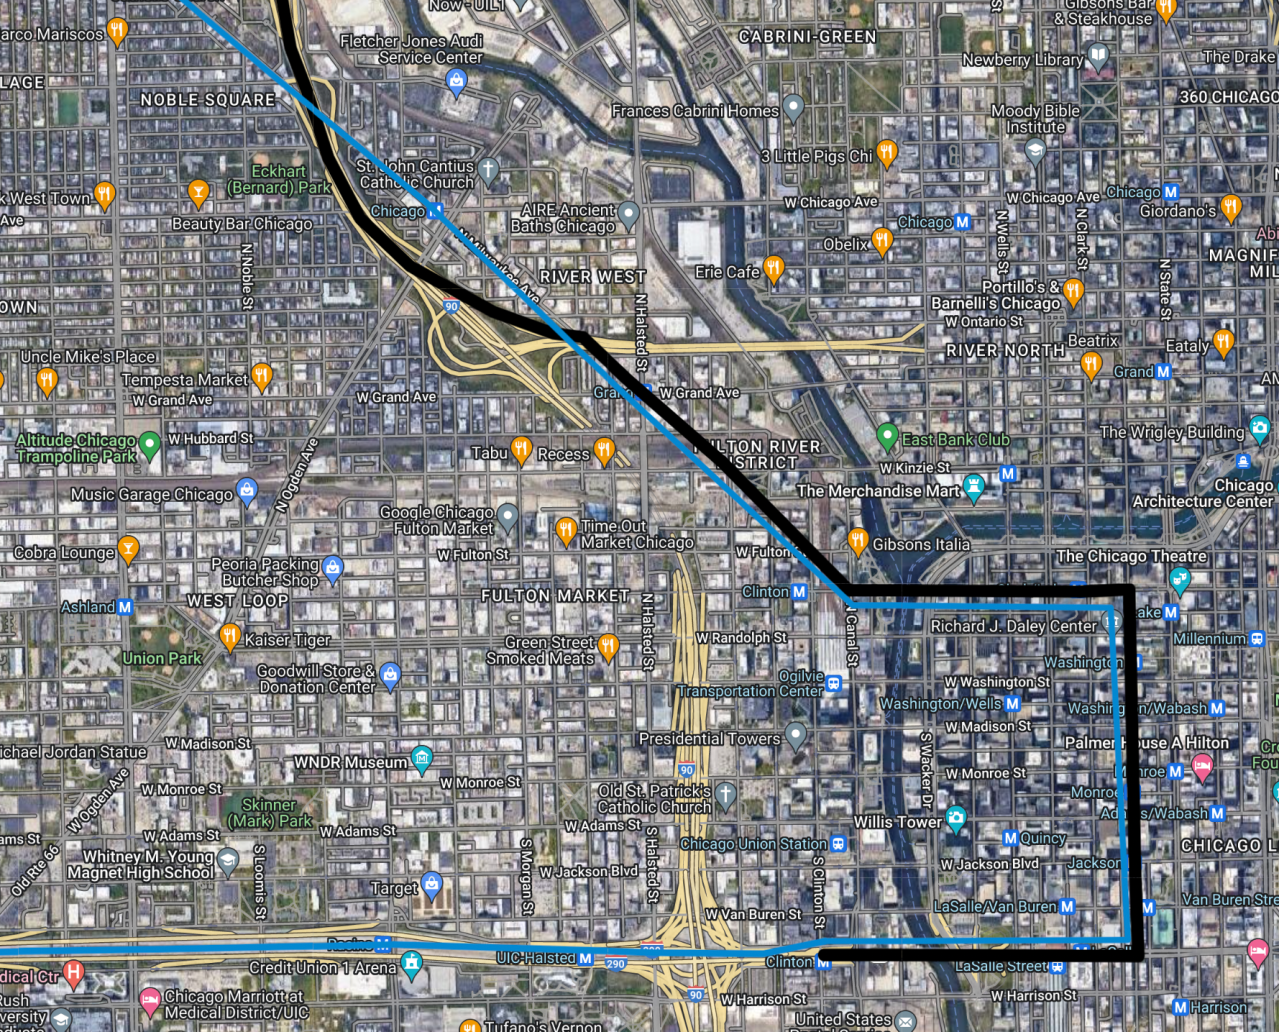 The Blue Line route (blue) and a possible route for express service (black.) Image: Google Maps